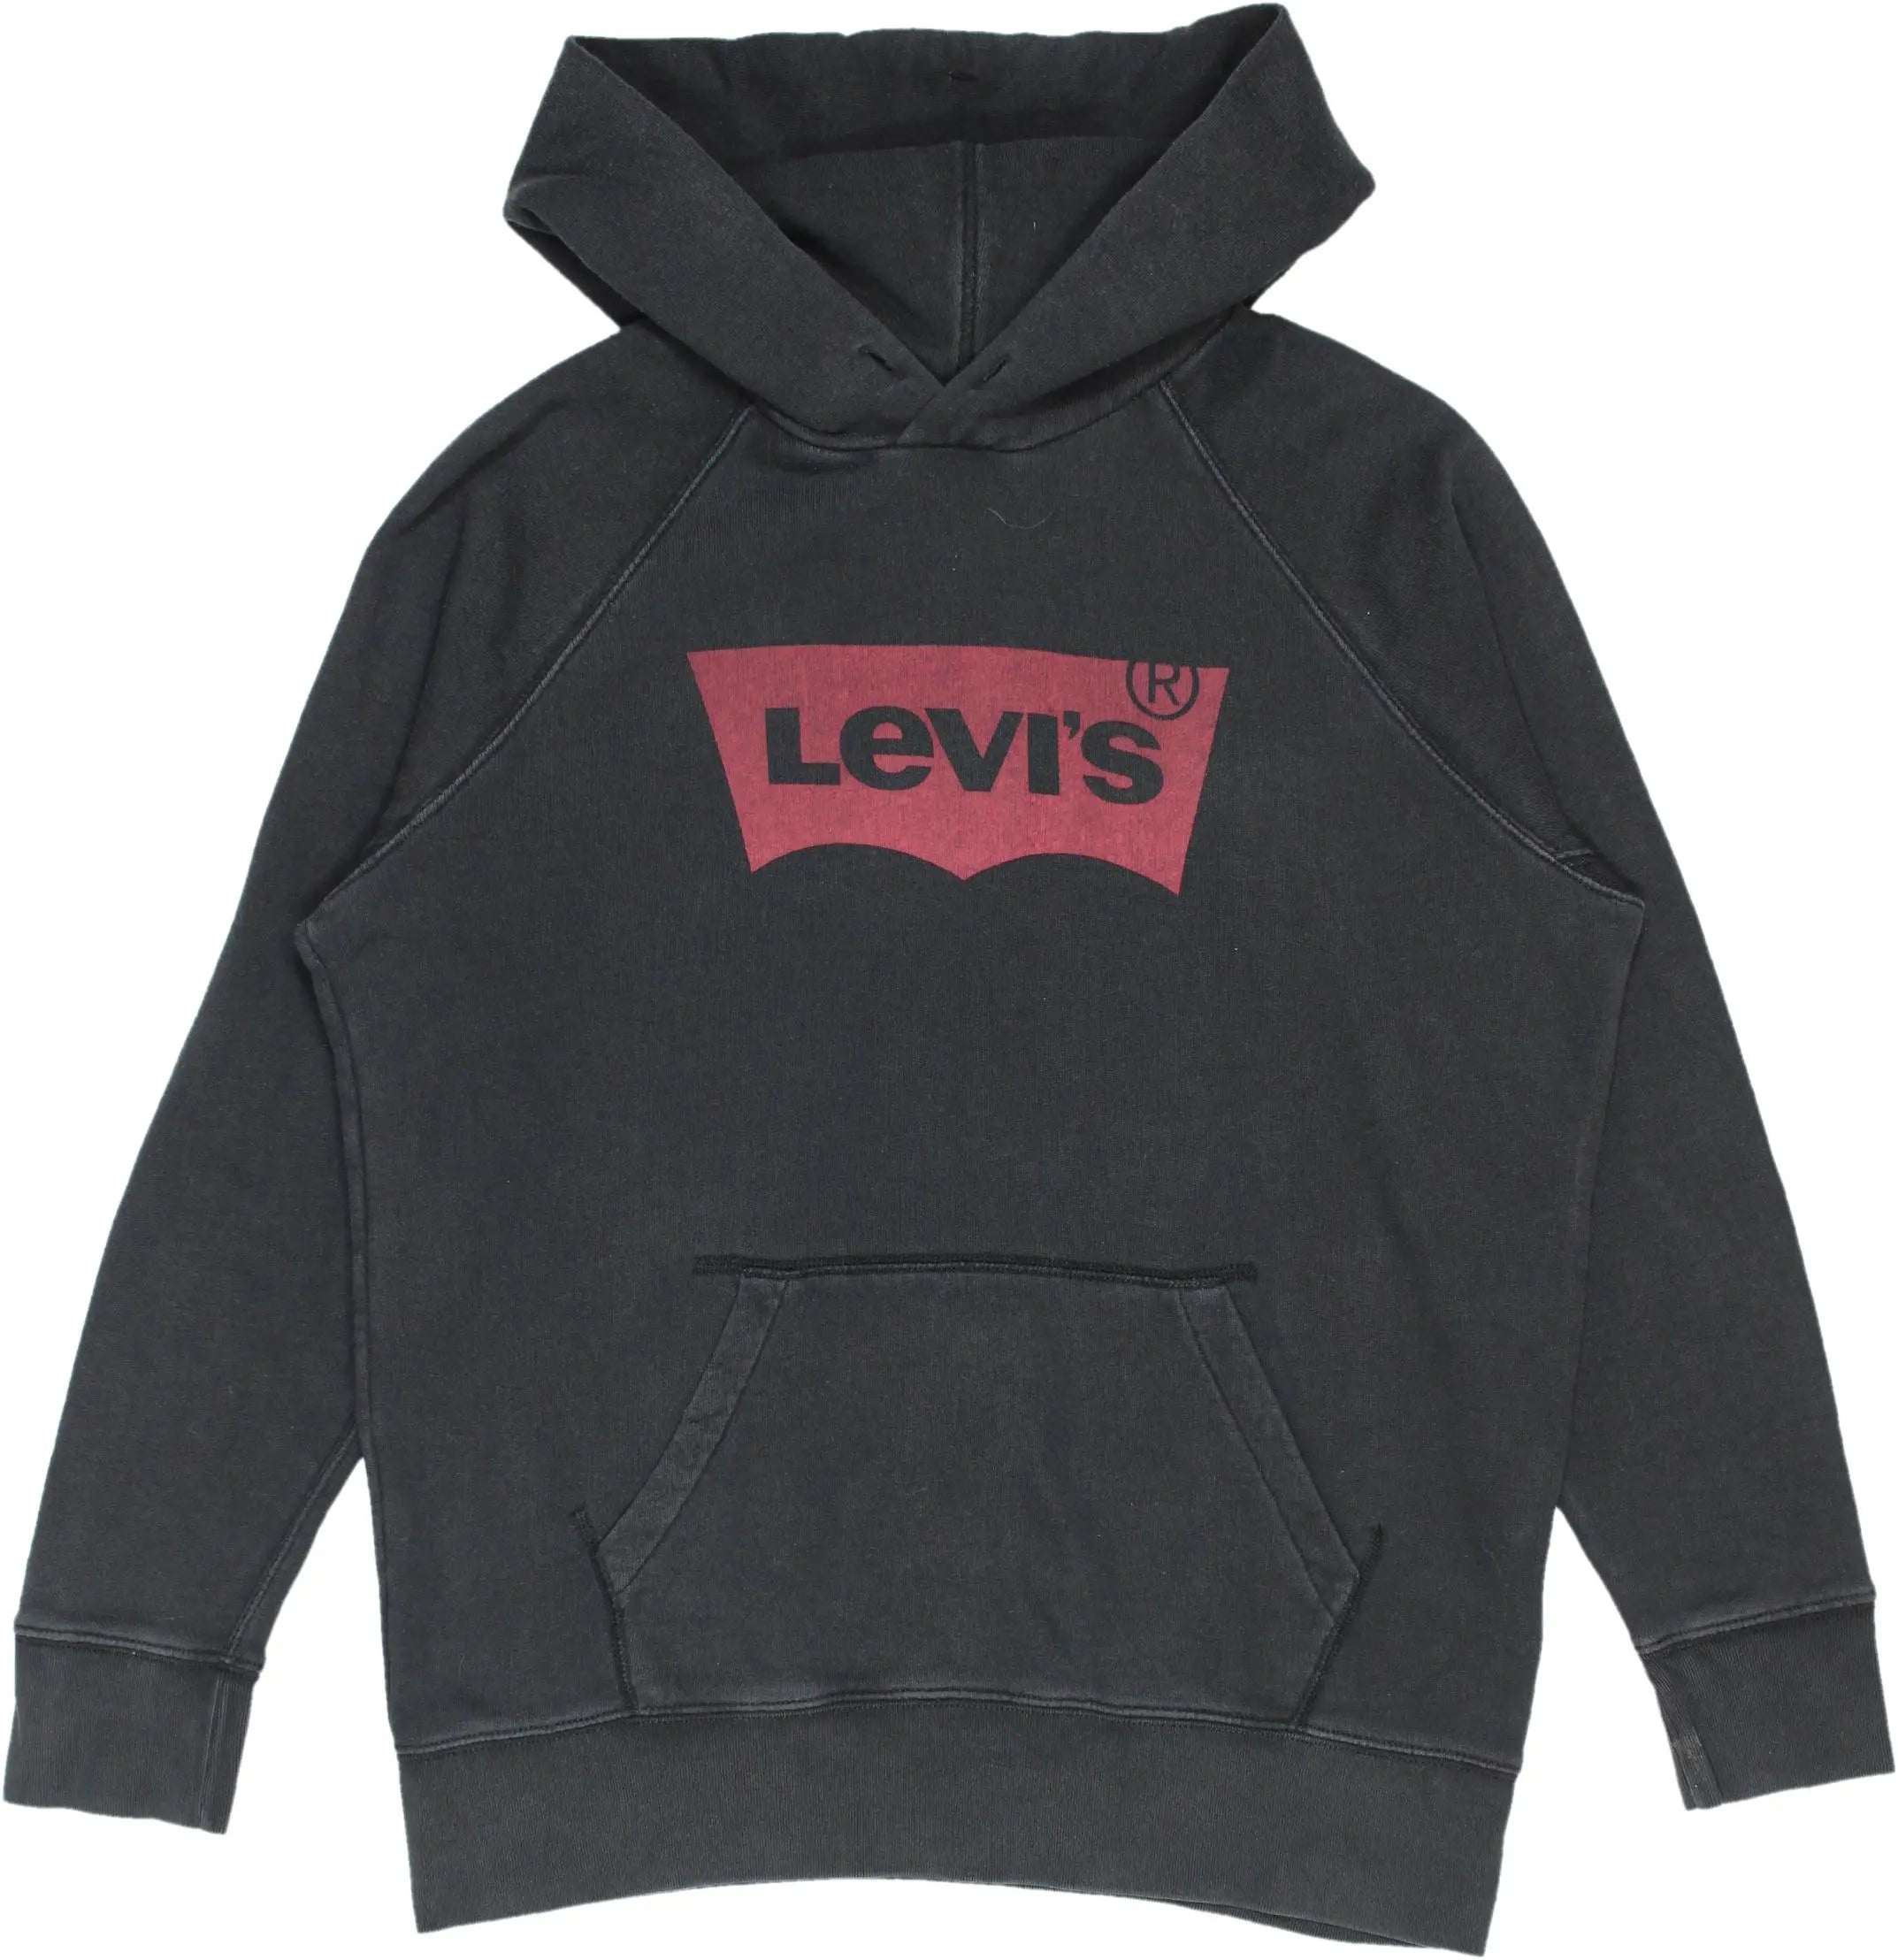 Levi's - Black Hoodie by Levi's- ThriftTale.com - Vintage and second handclothing